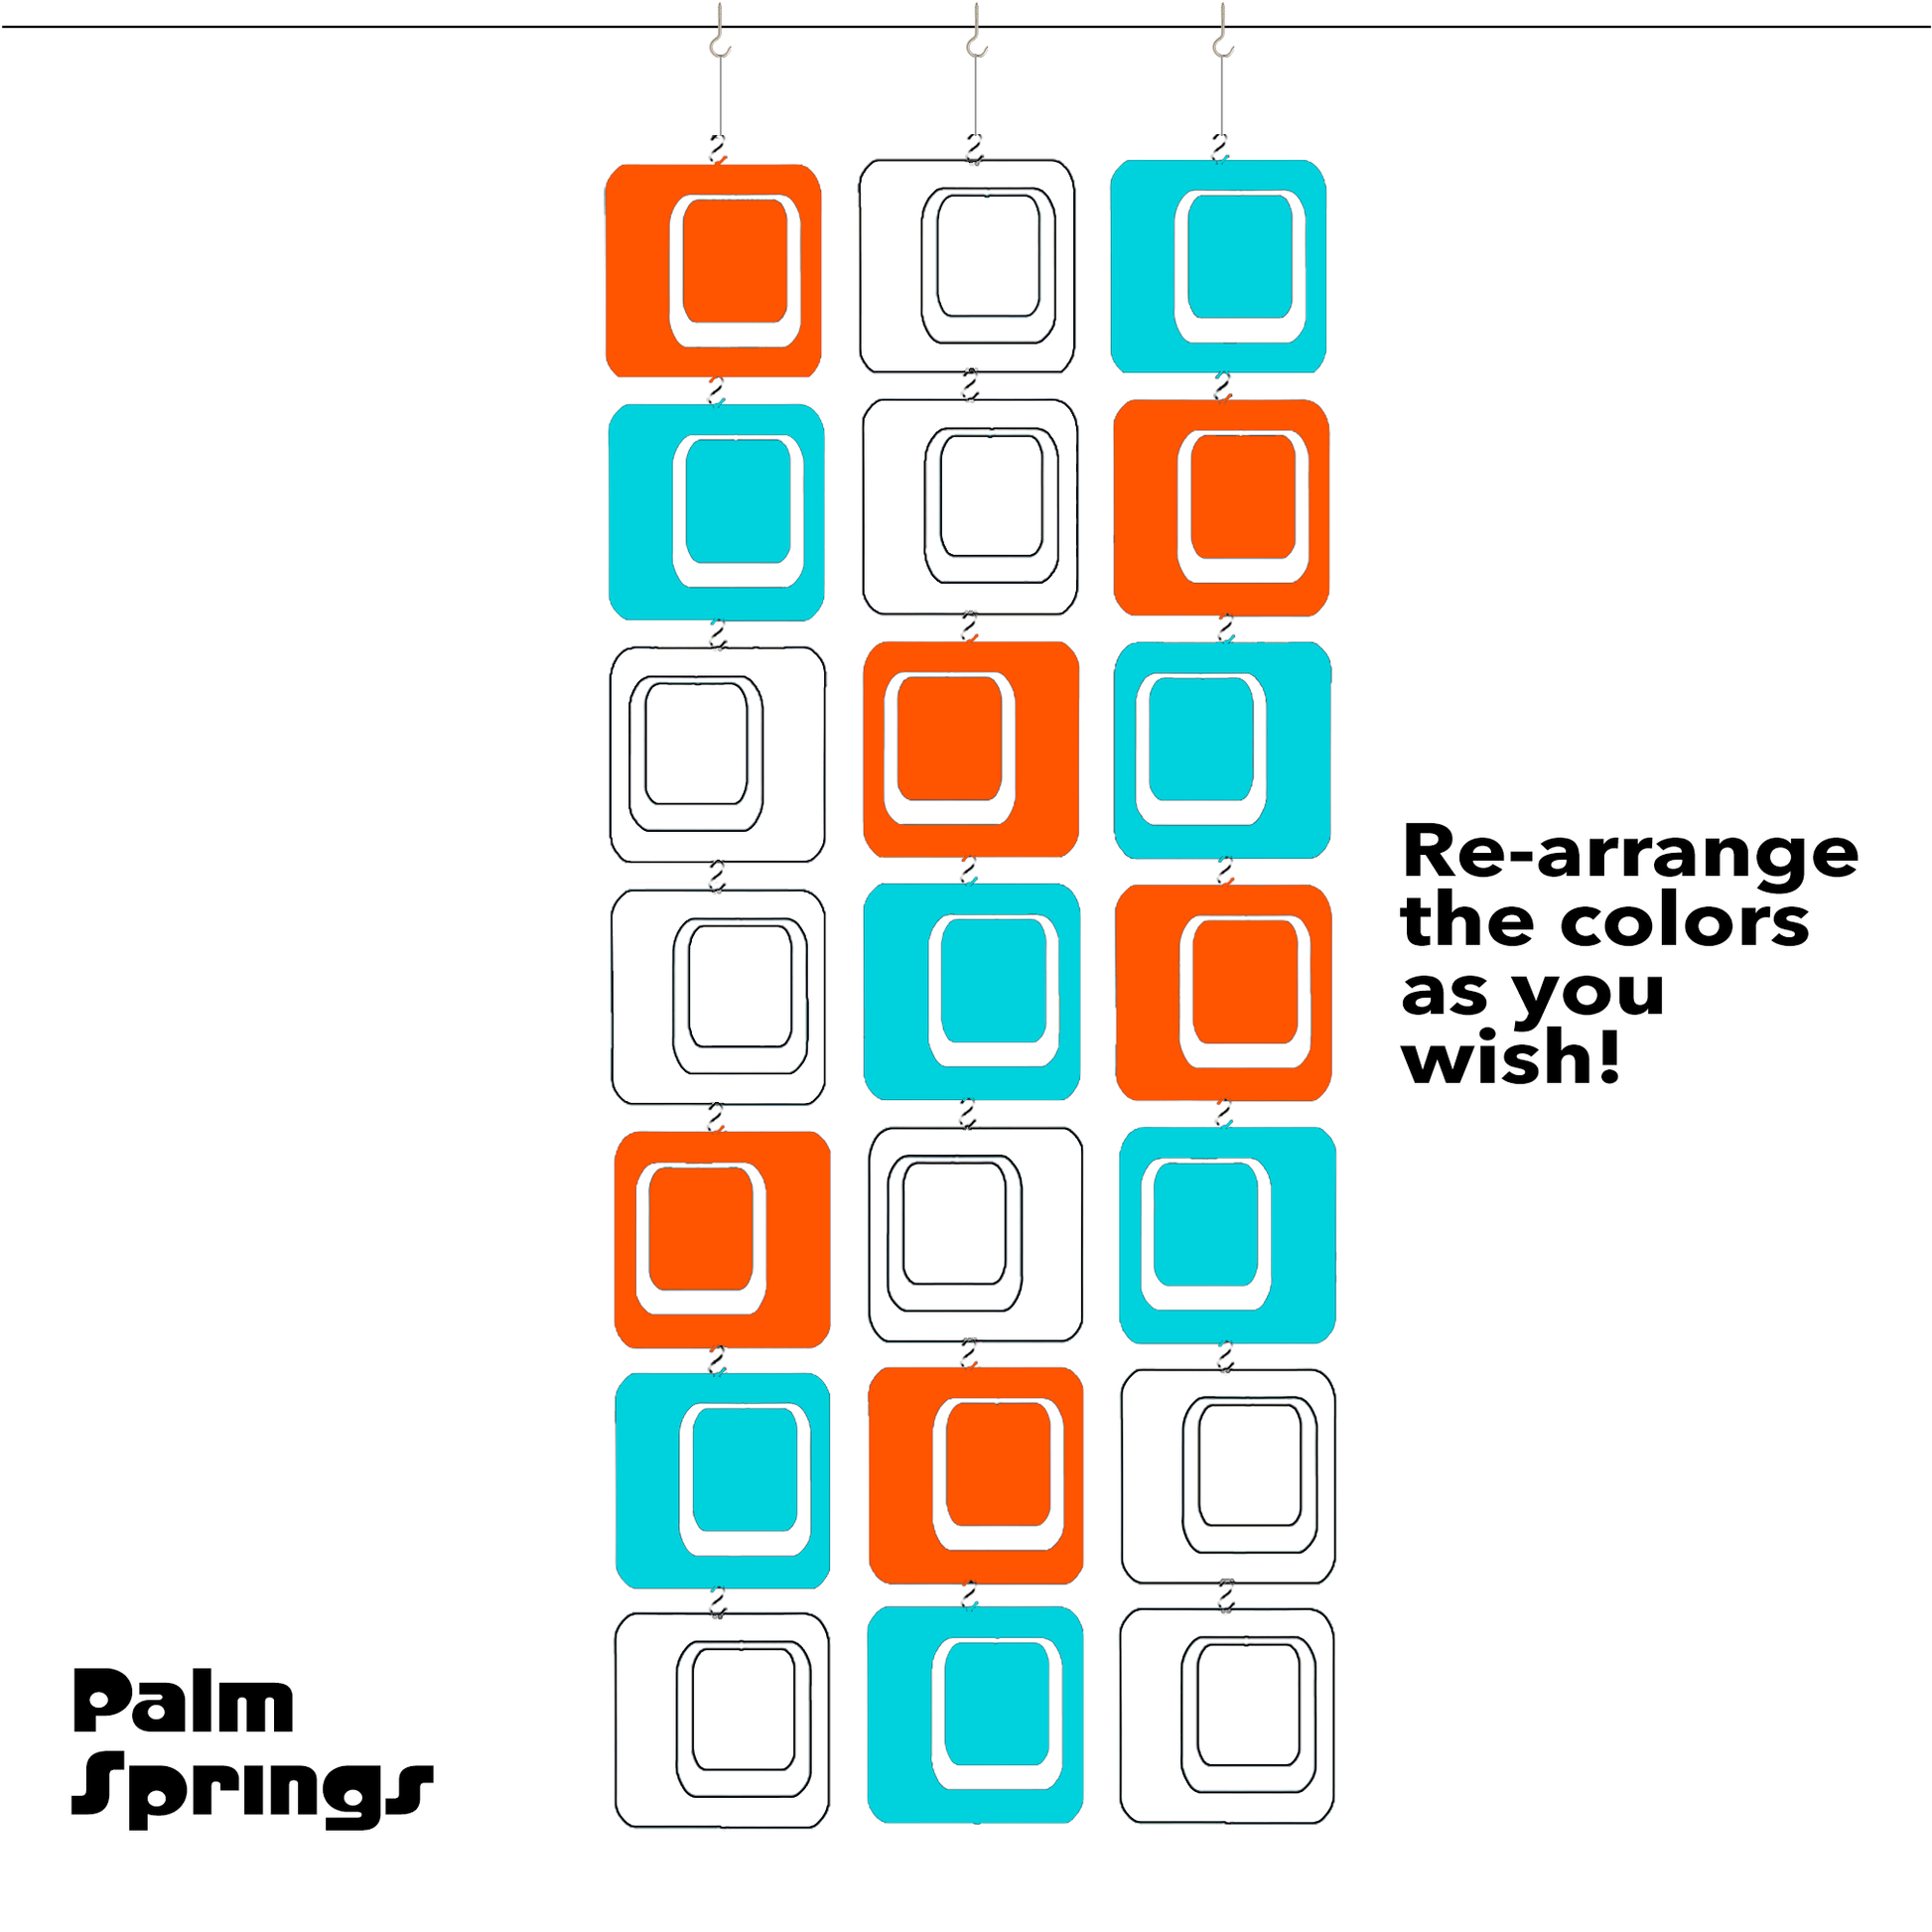 Palm Springs Coolsville XL hanging art mobile and room divider  in Orange, Aqua Blue, and White- retro 1960s and 70s retro mid century modern style home decoration by AtomicMobiles.com